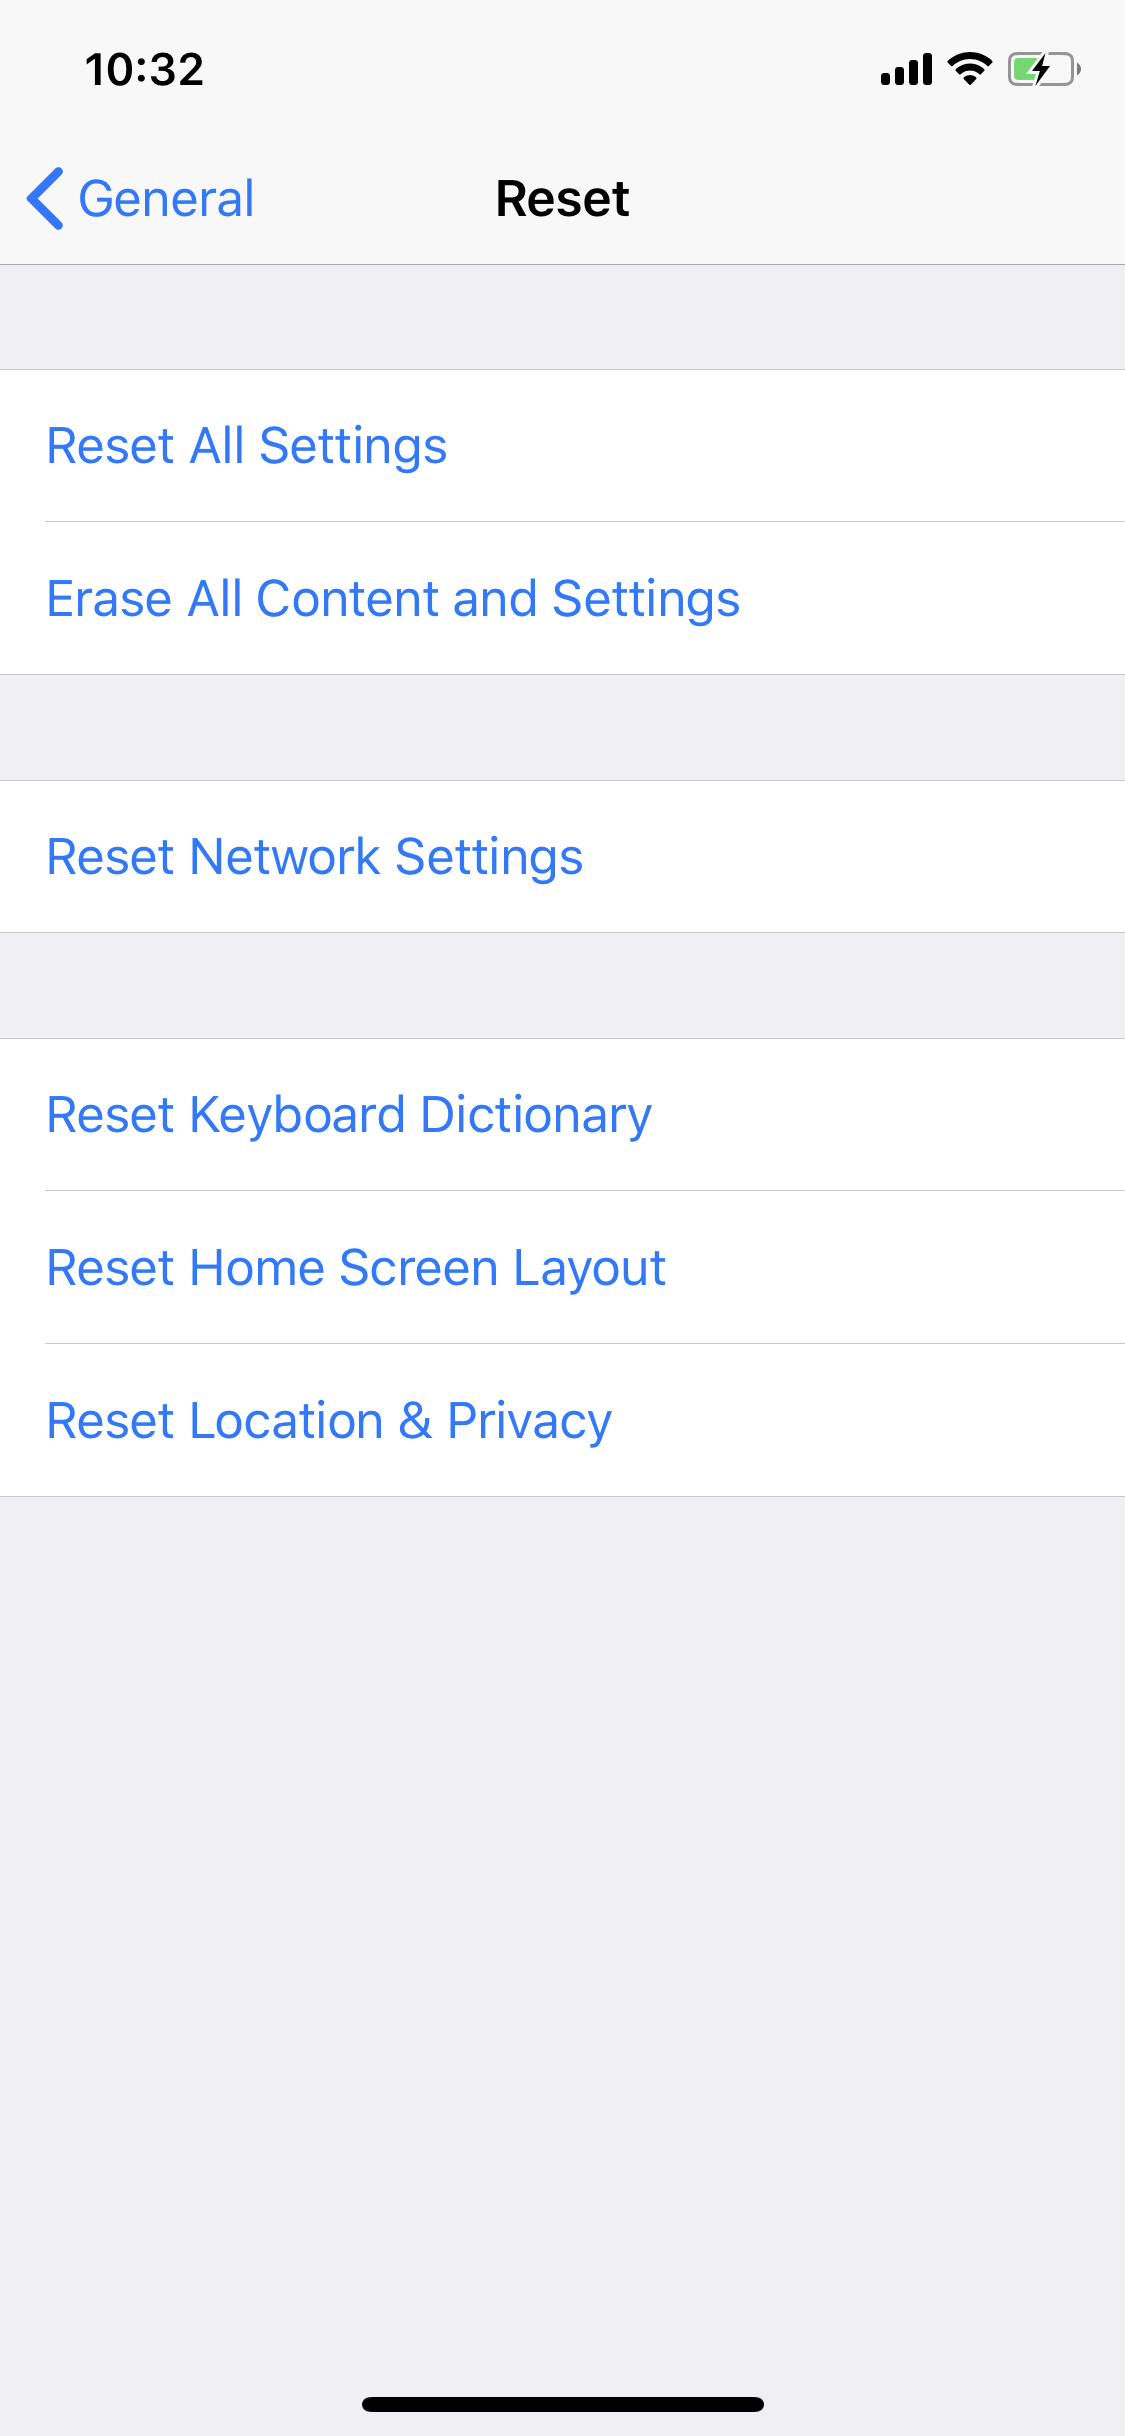 How to Fix iOS 12 GPS Location Services Issue on iPhone or iPad?